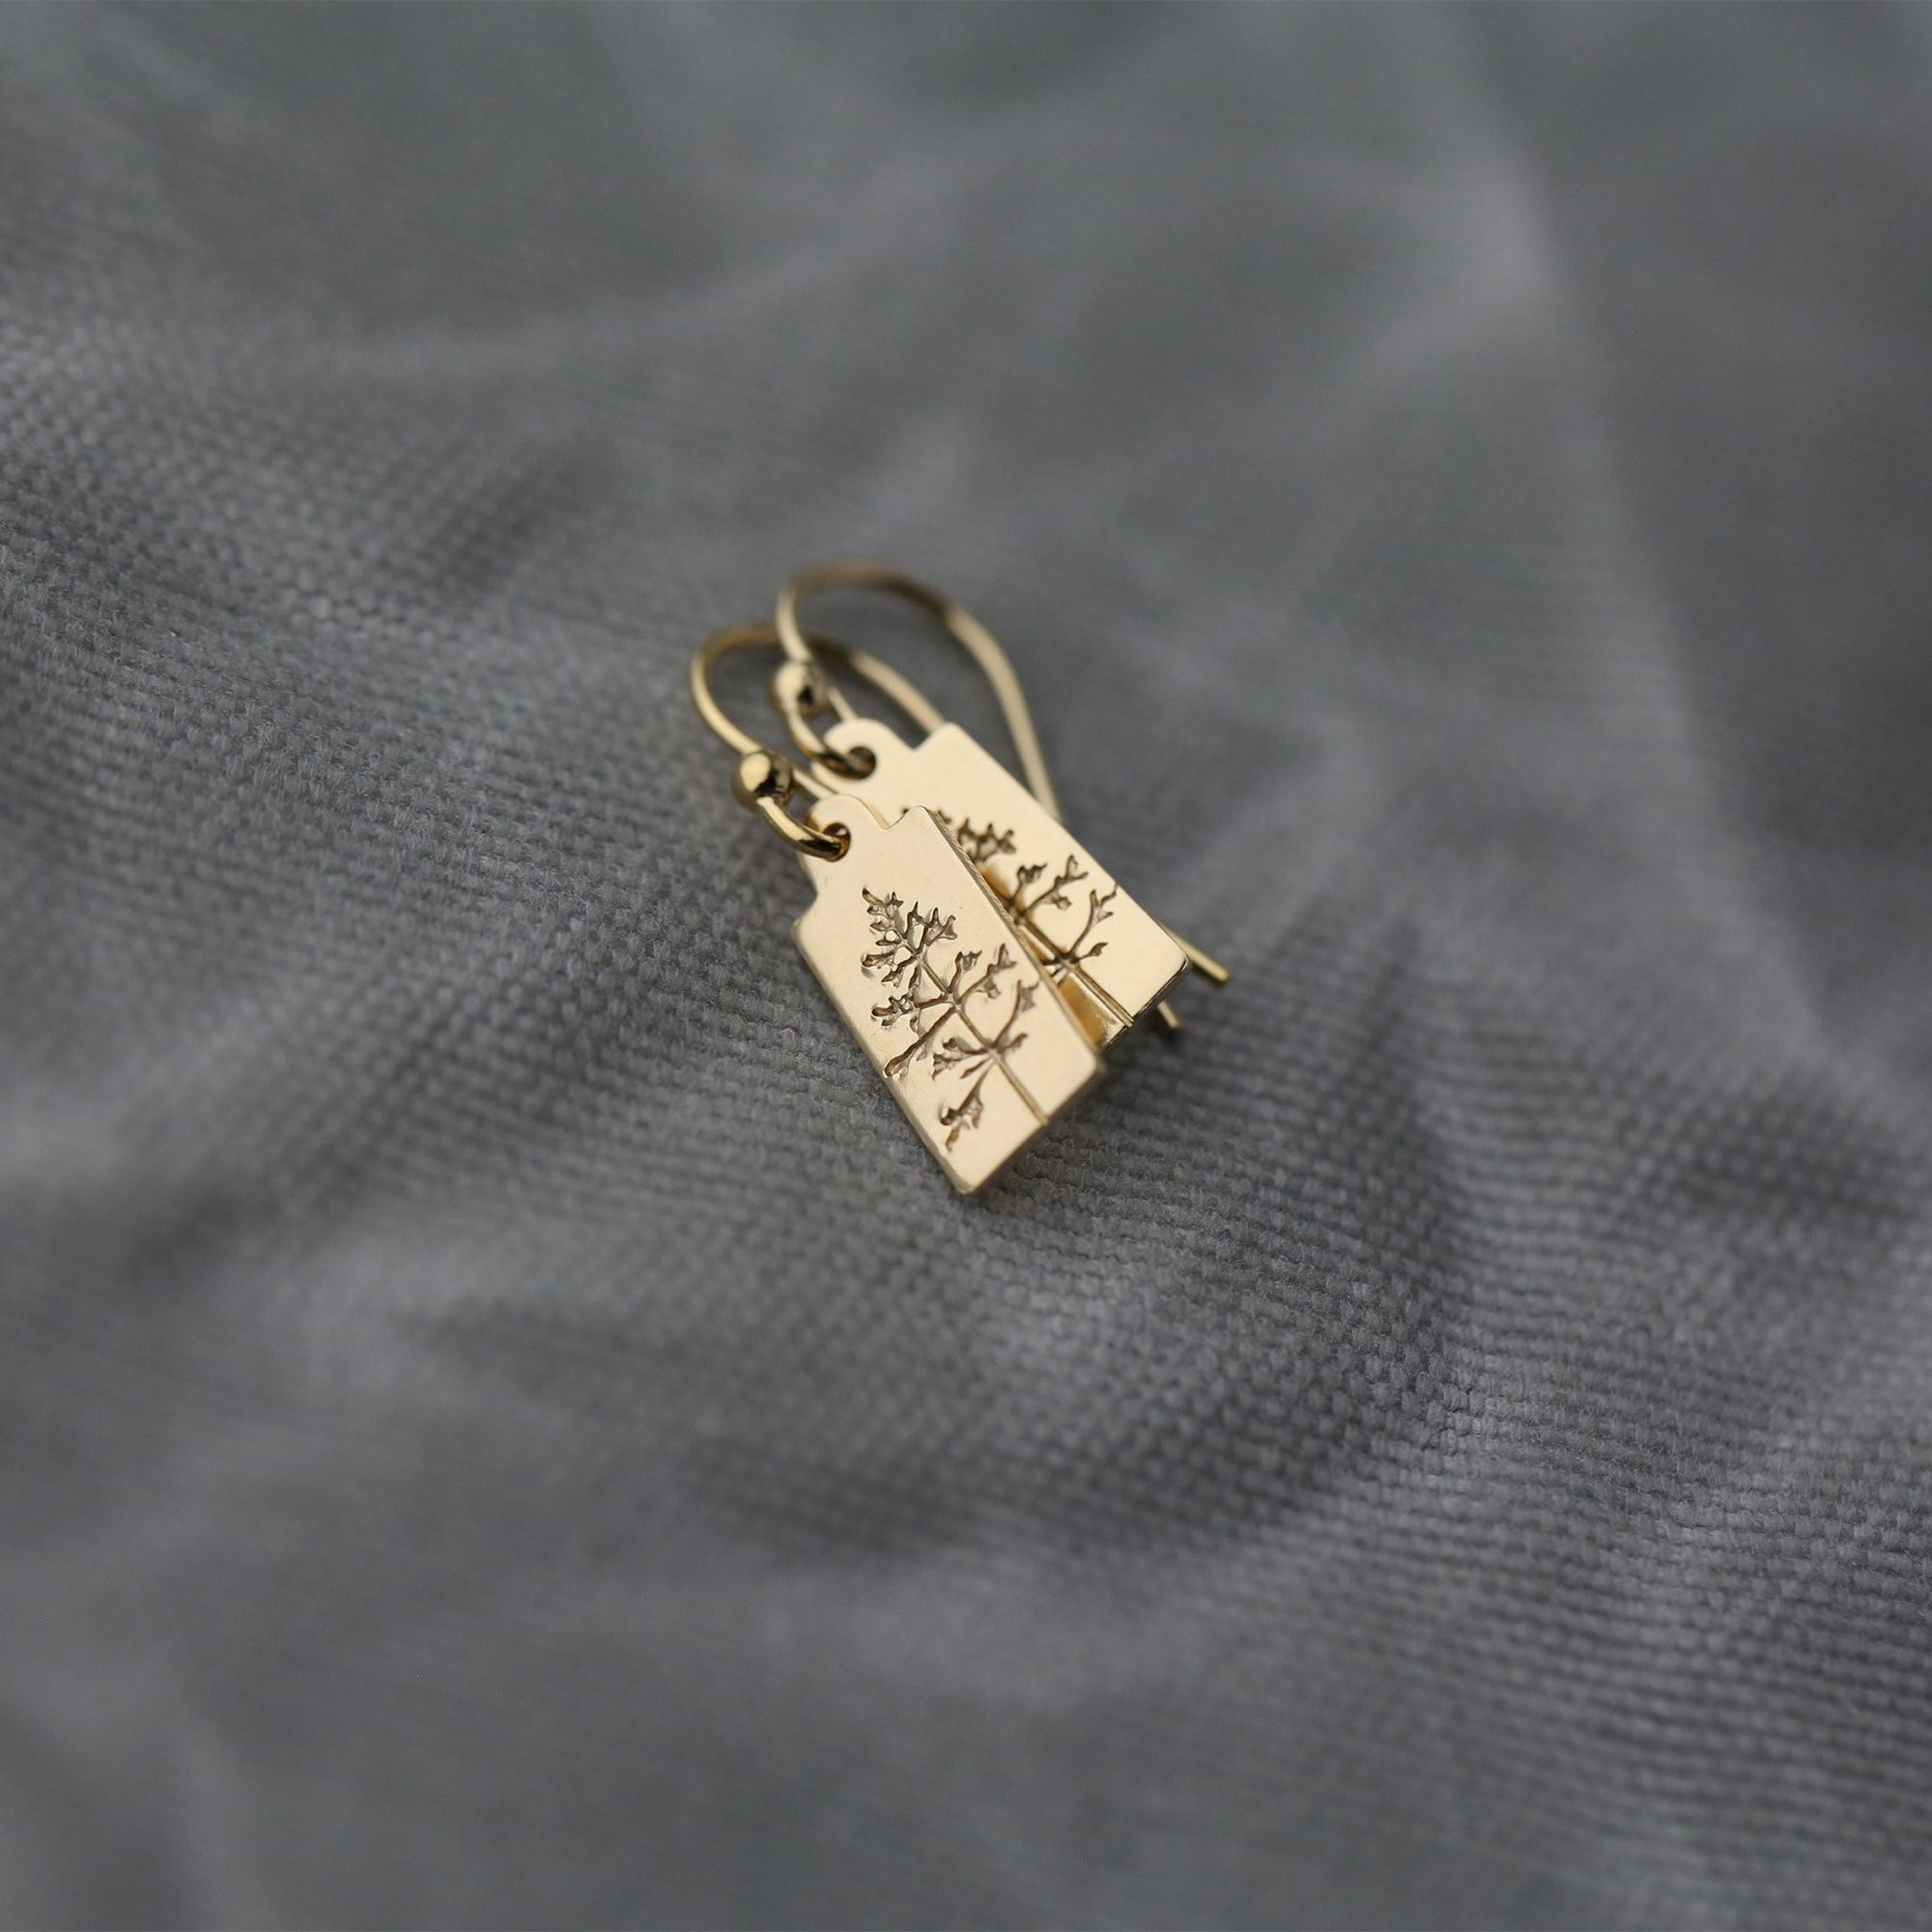 Hand Stamped Gold Tree Tag Earrings